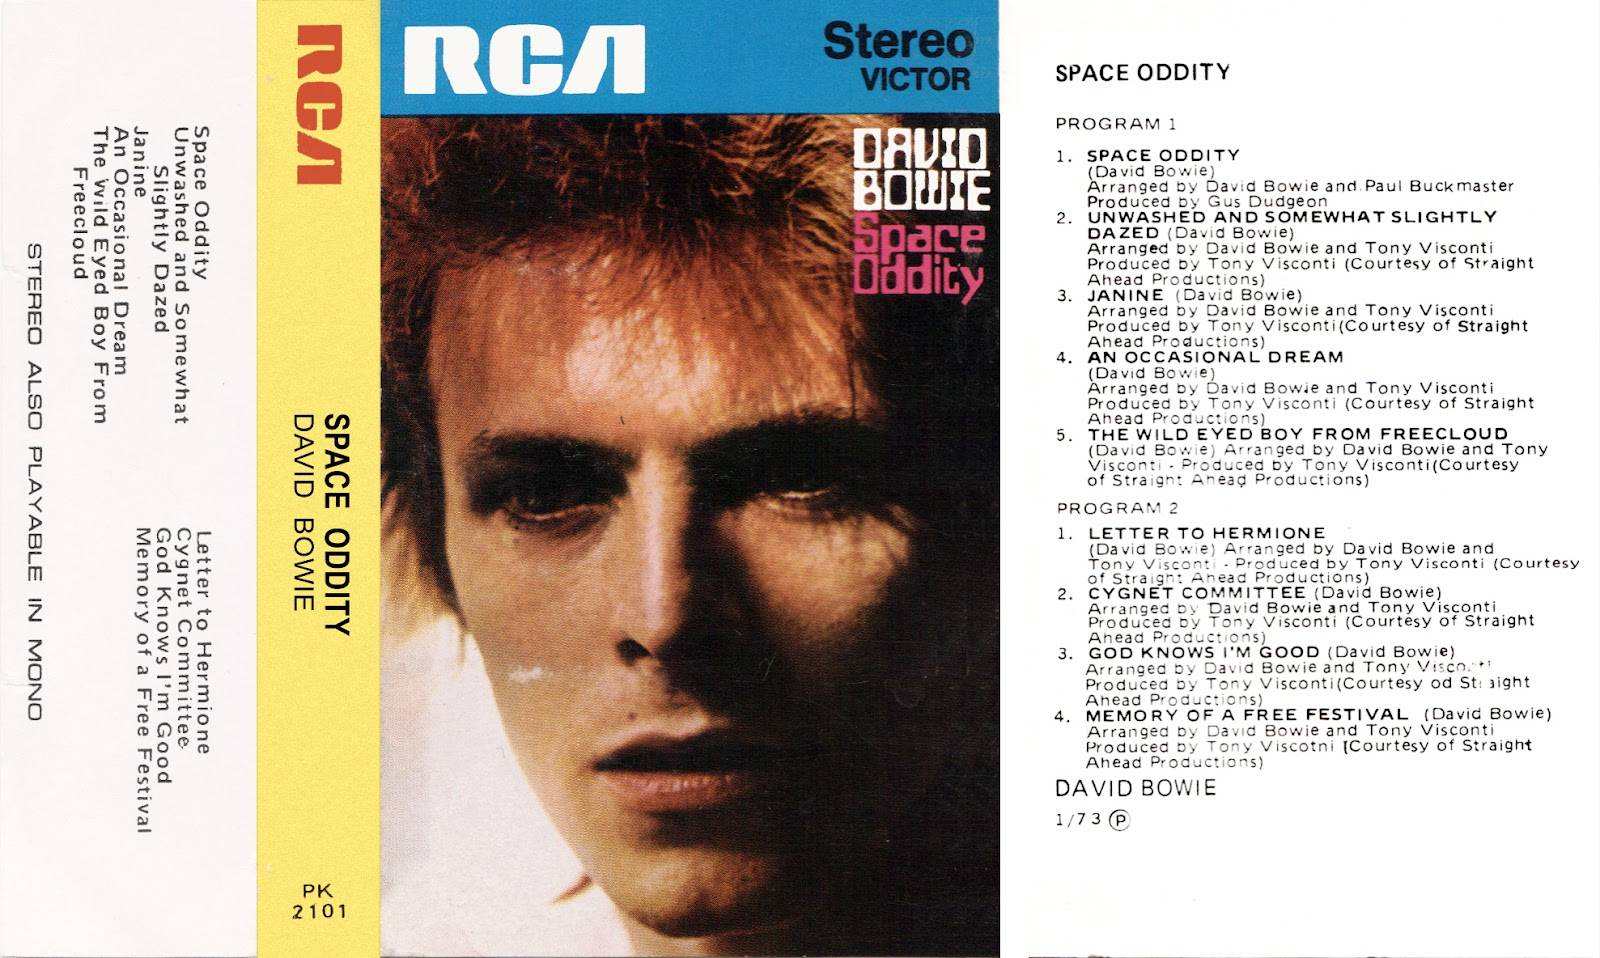 David bowie's space oddity. Дэвида Боуи Space Oddity альбом. Space Oddity David Bowie обложка. Дэвид Боуи Спэйс Оддити. Space Oddity обложка.